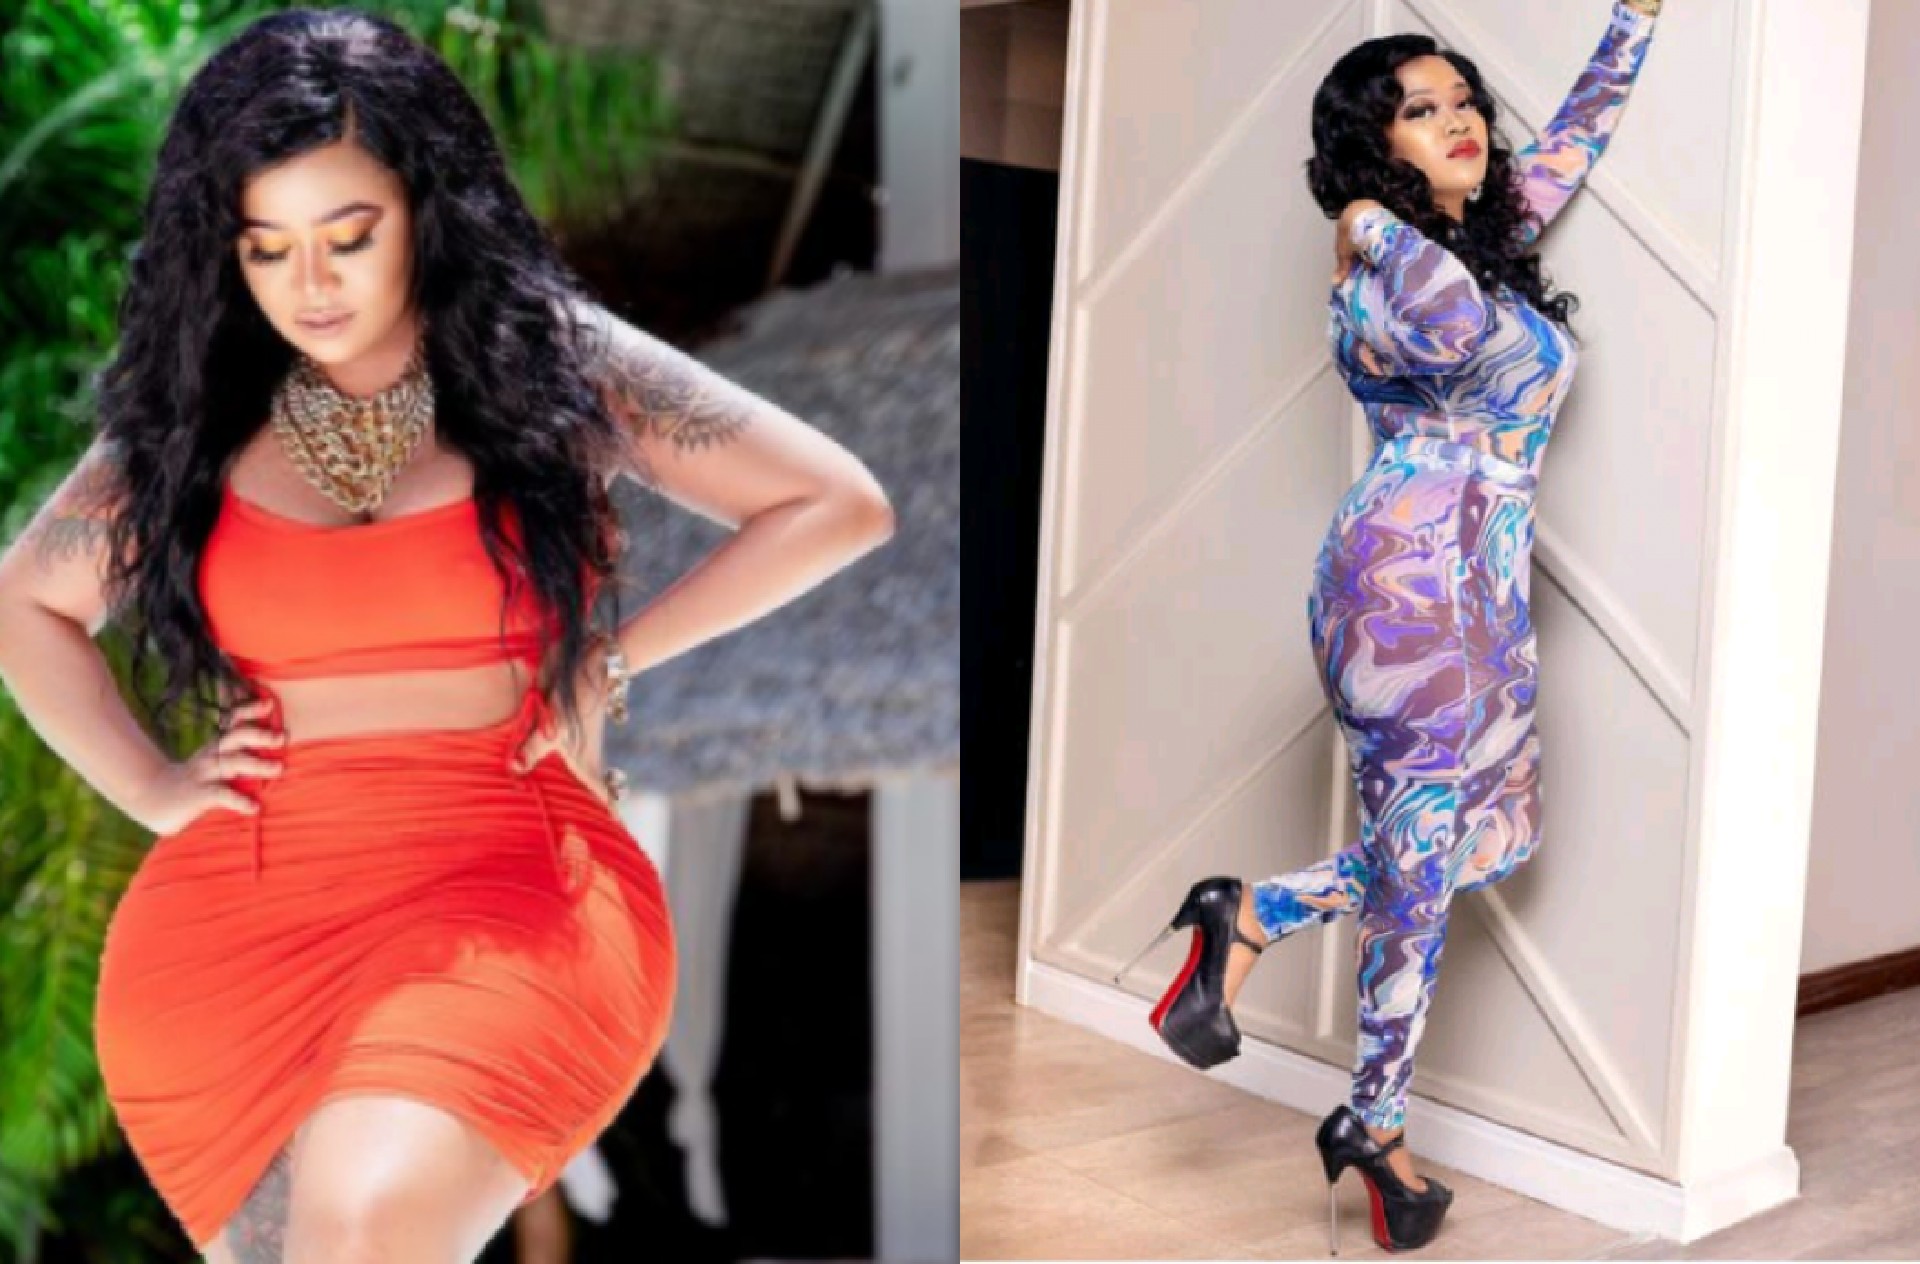 "The complications are unbearable" Vera Sidika warns about cosmetic surgery following butt implant removal